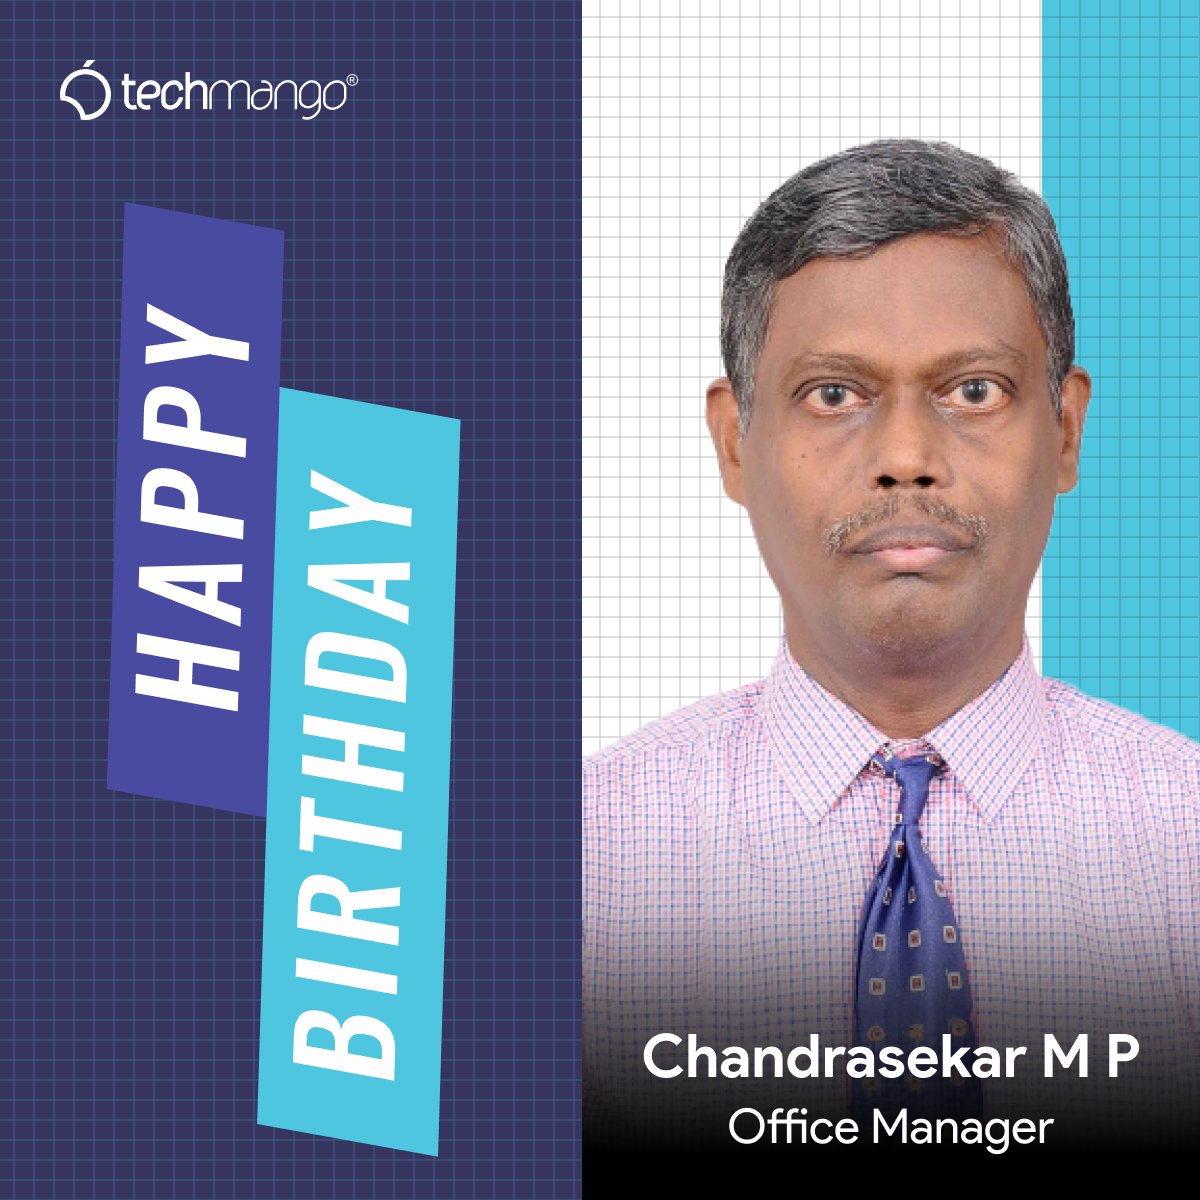 Techmango Wishes Happy Birthday to M P Chandrasekar Cheers to another fantastic year ahead! May this birthday be the start of your greatest, most wonderful journey yet. Have a fantastic day! #happybirthday #birthdaywishes #birthdaycelebration #birthdayparty #birthdaycheers